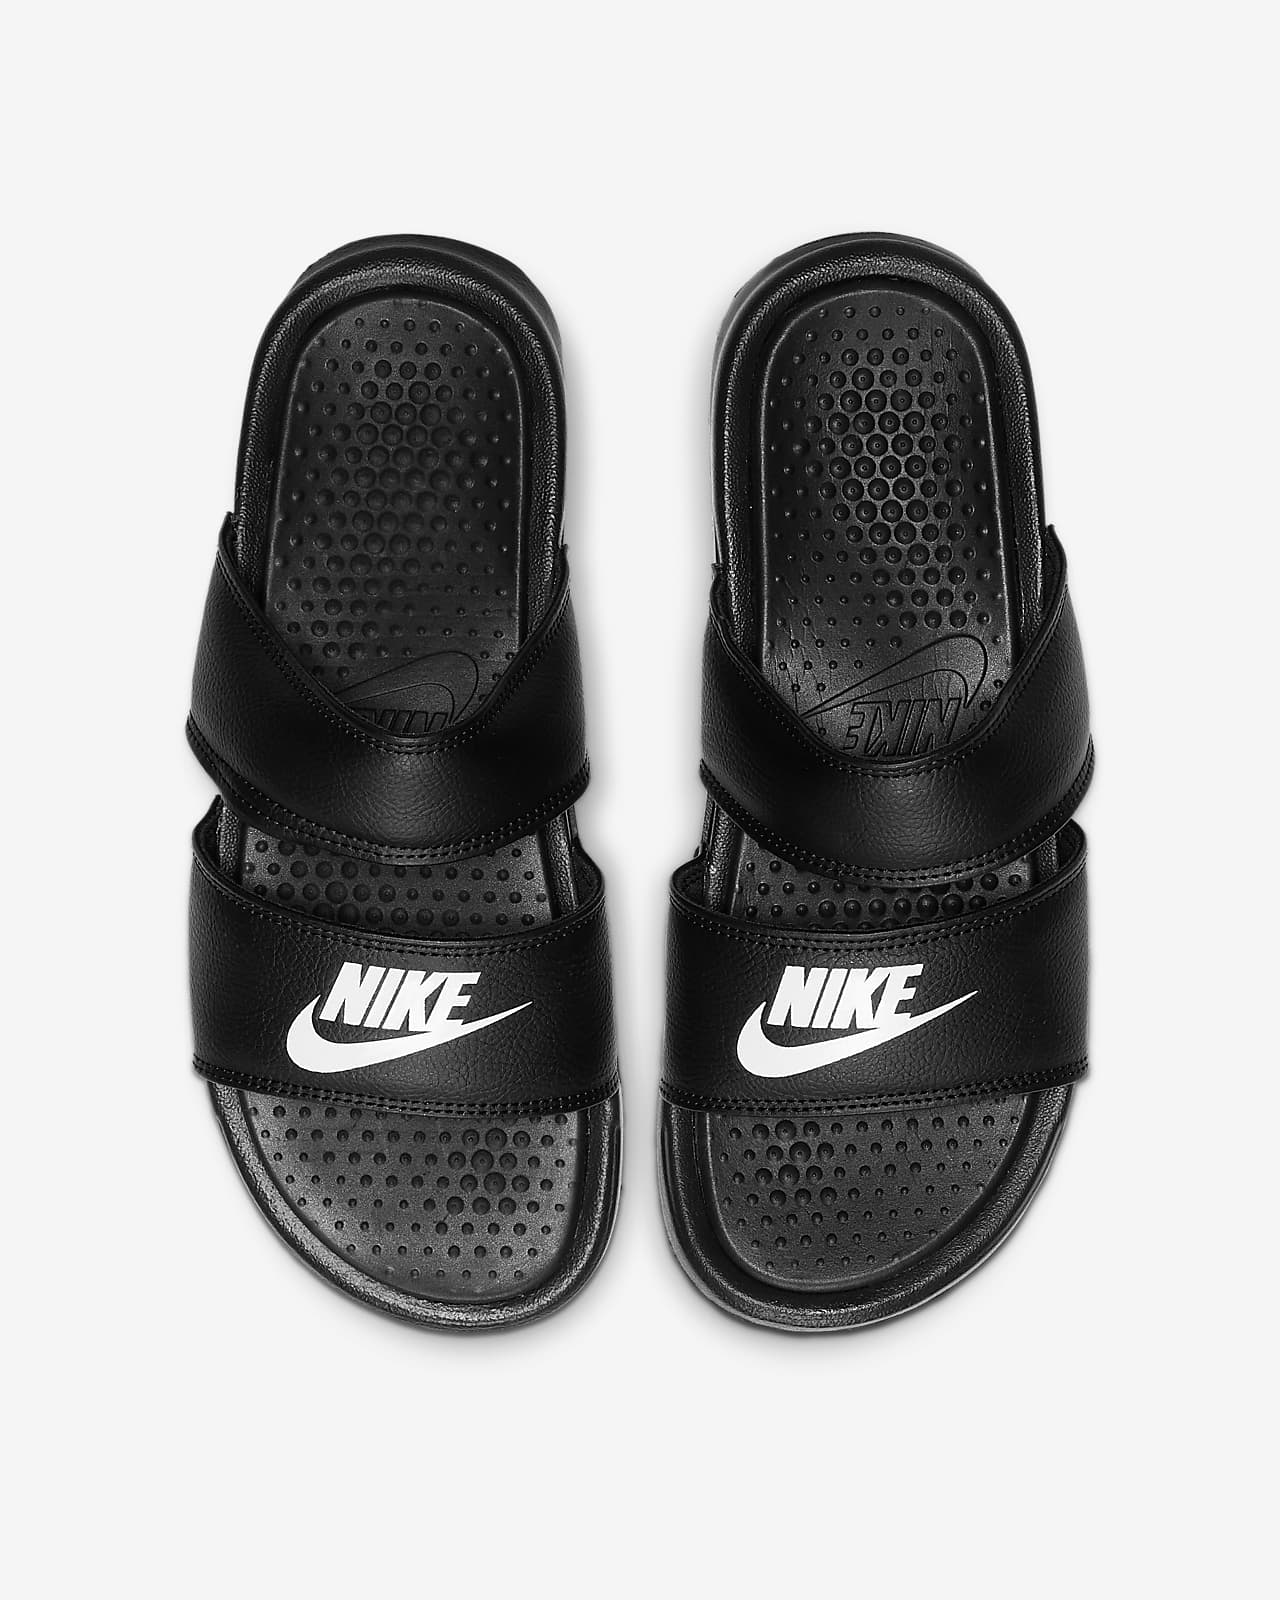 nike two strap shoes